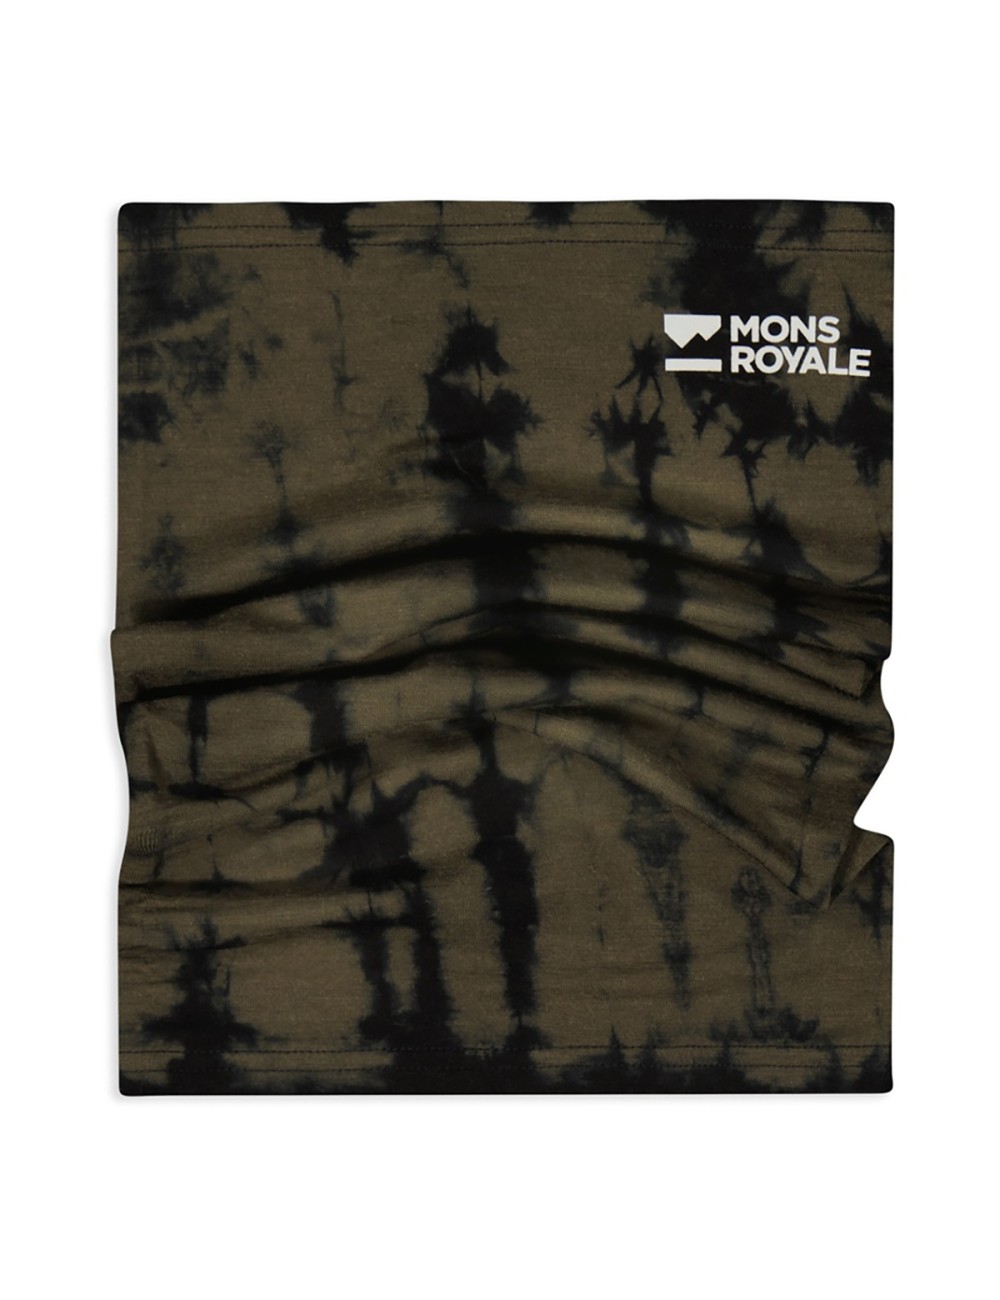 Mons Royale Daily Dose Neckwarmer - Olive Tie